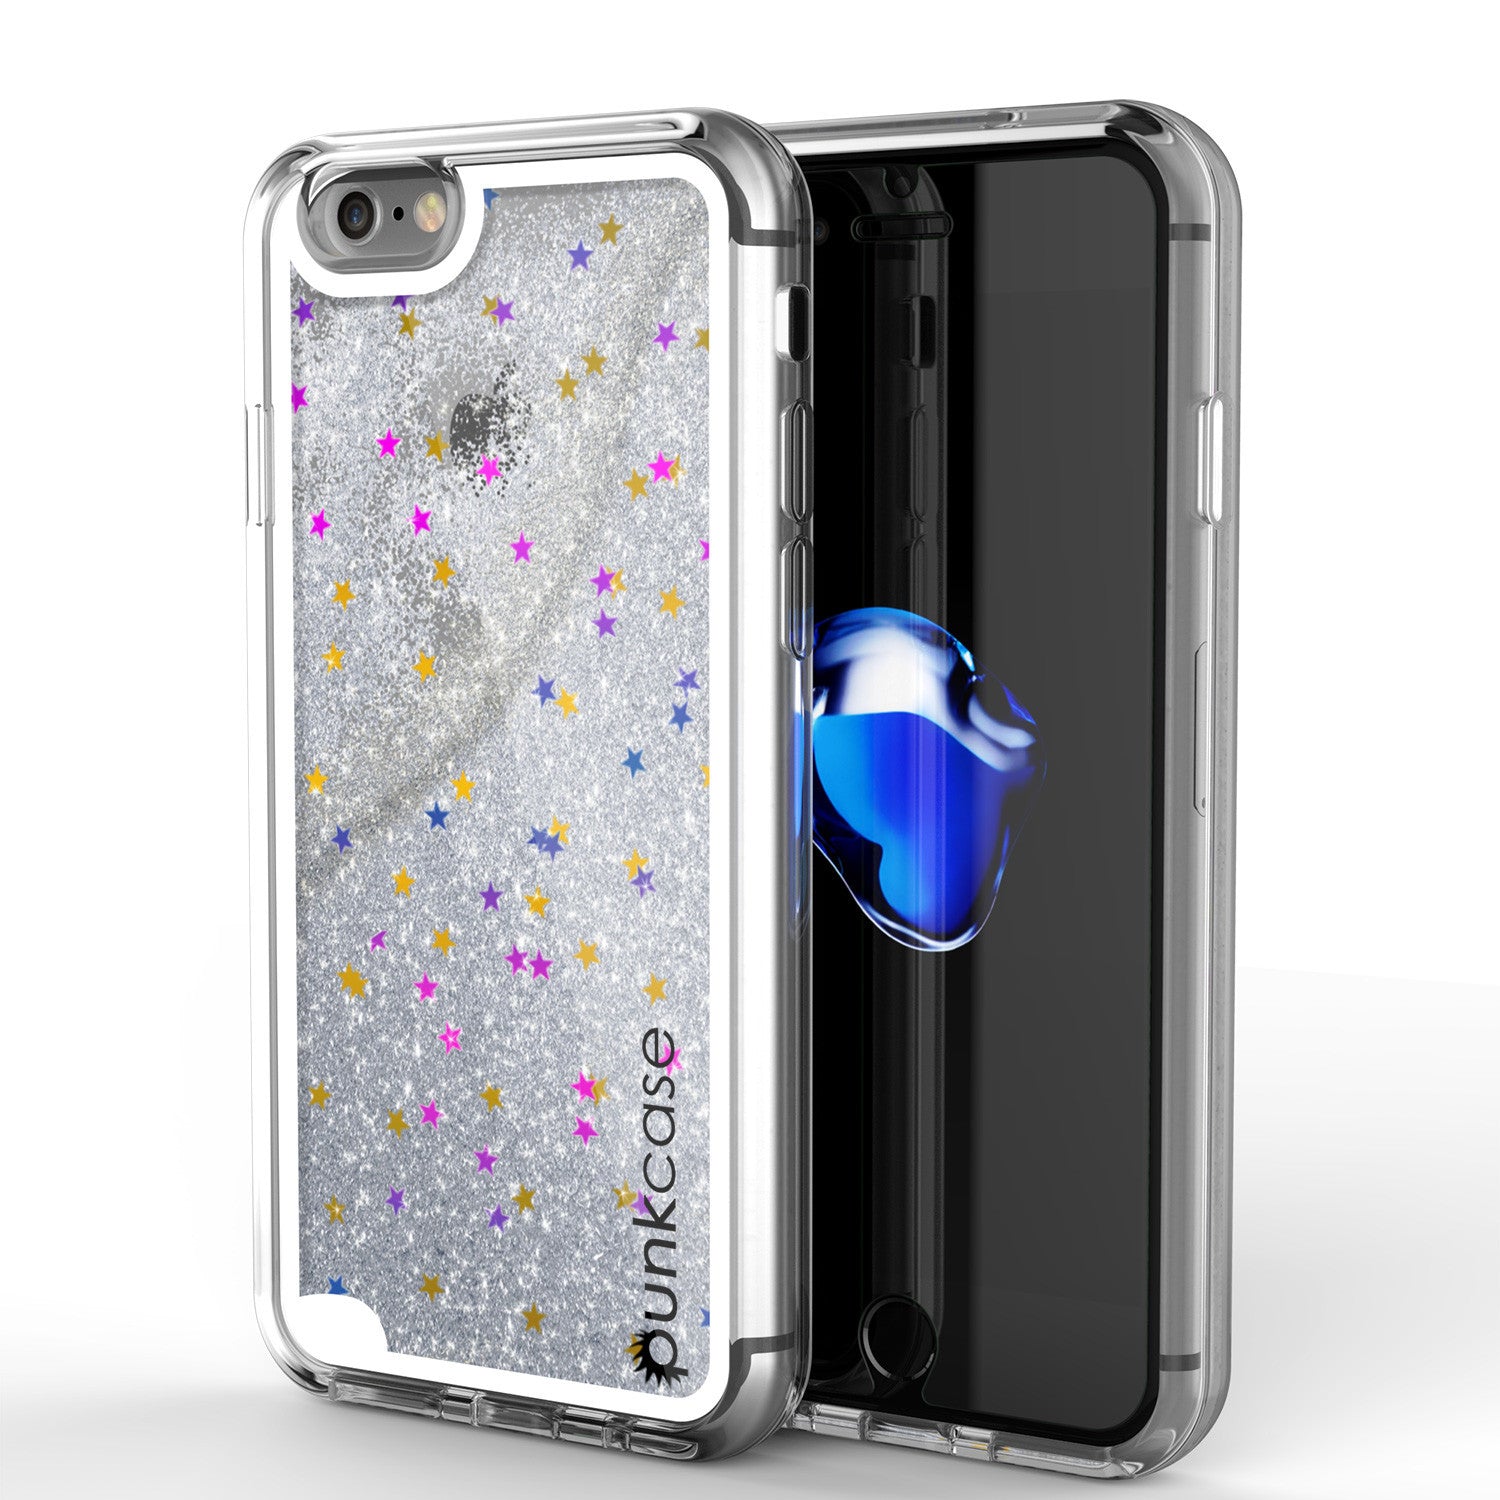 iPhone 7 Case, PunkCase LIQUID Silver Series, Protective Dual Layer Floating Glitter Cover